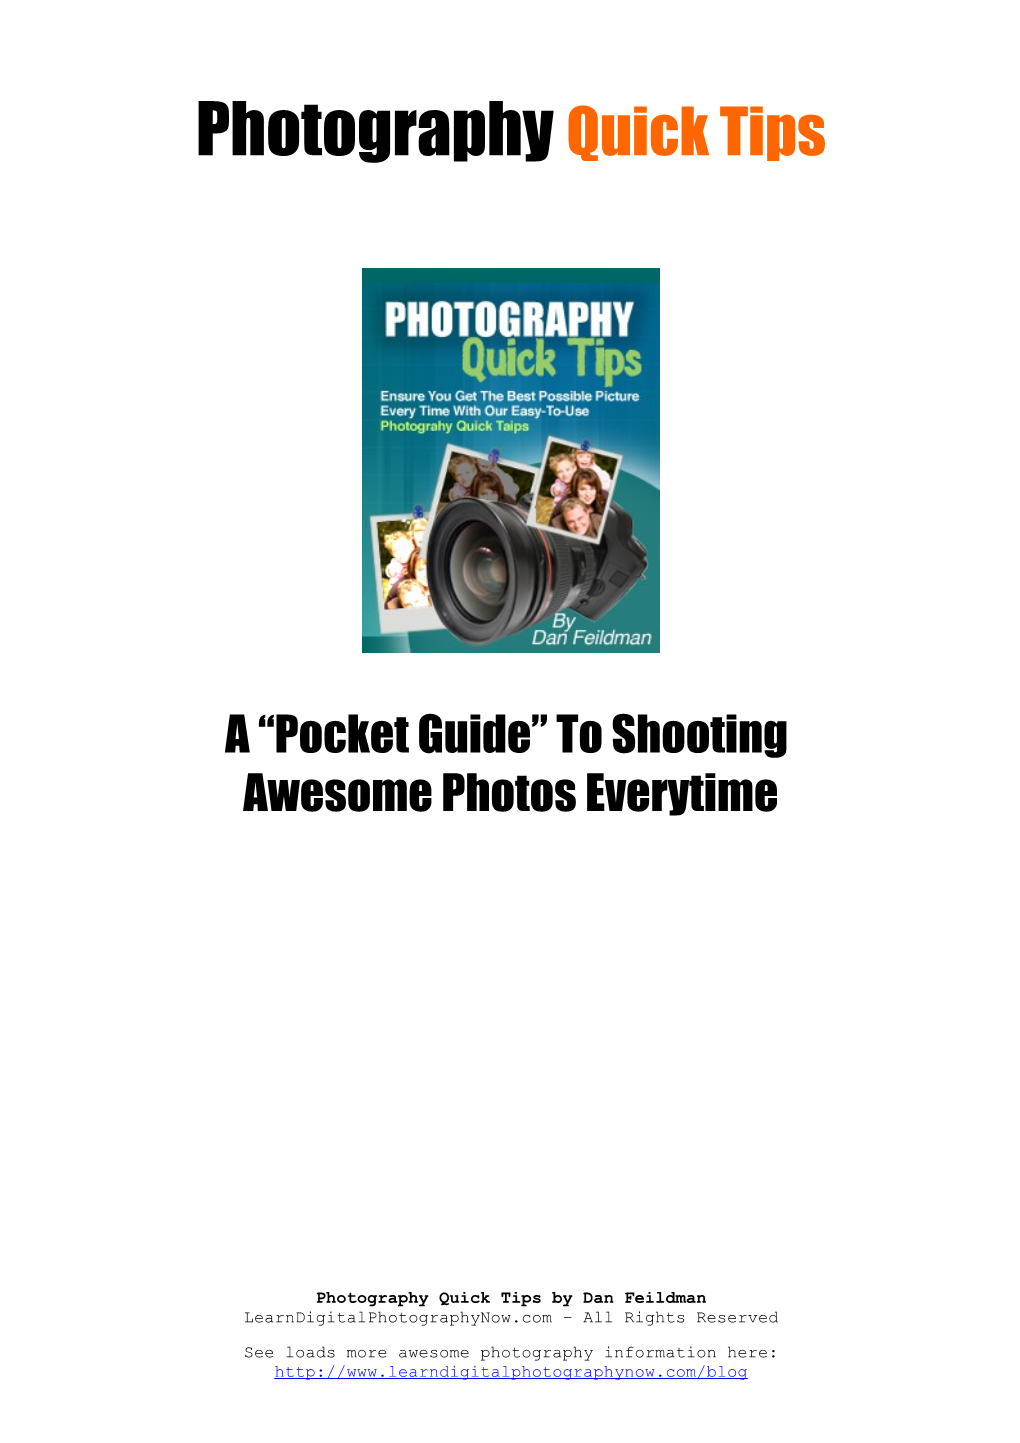 Photography Quick Tips Guides